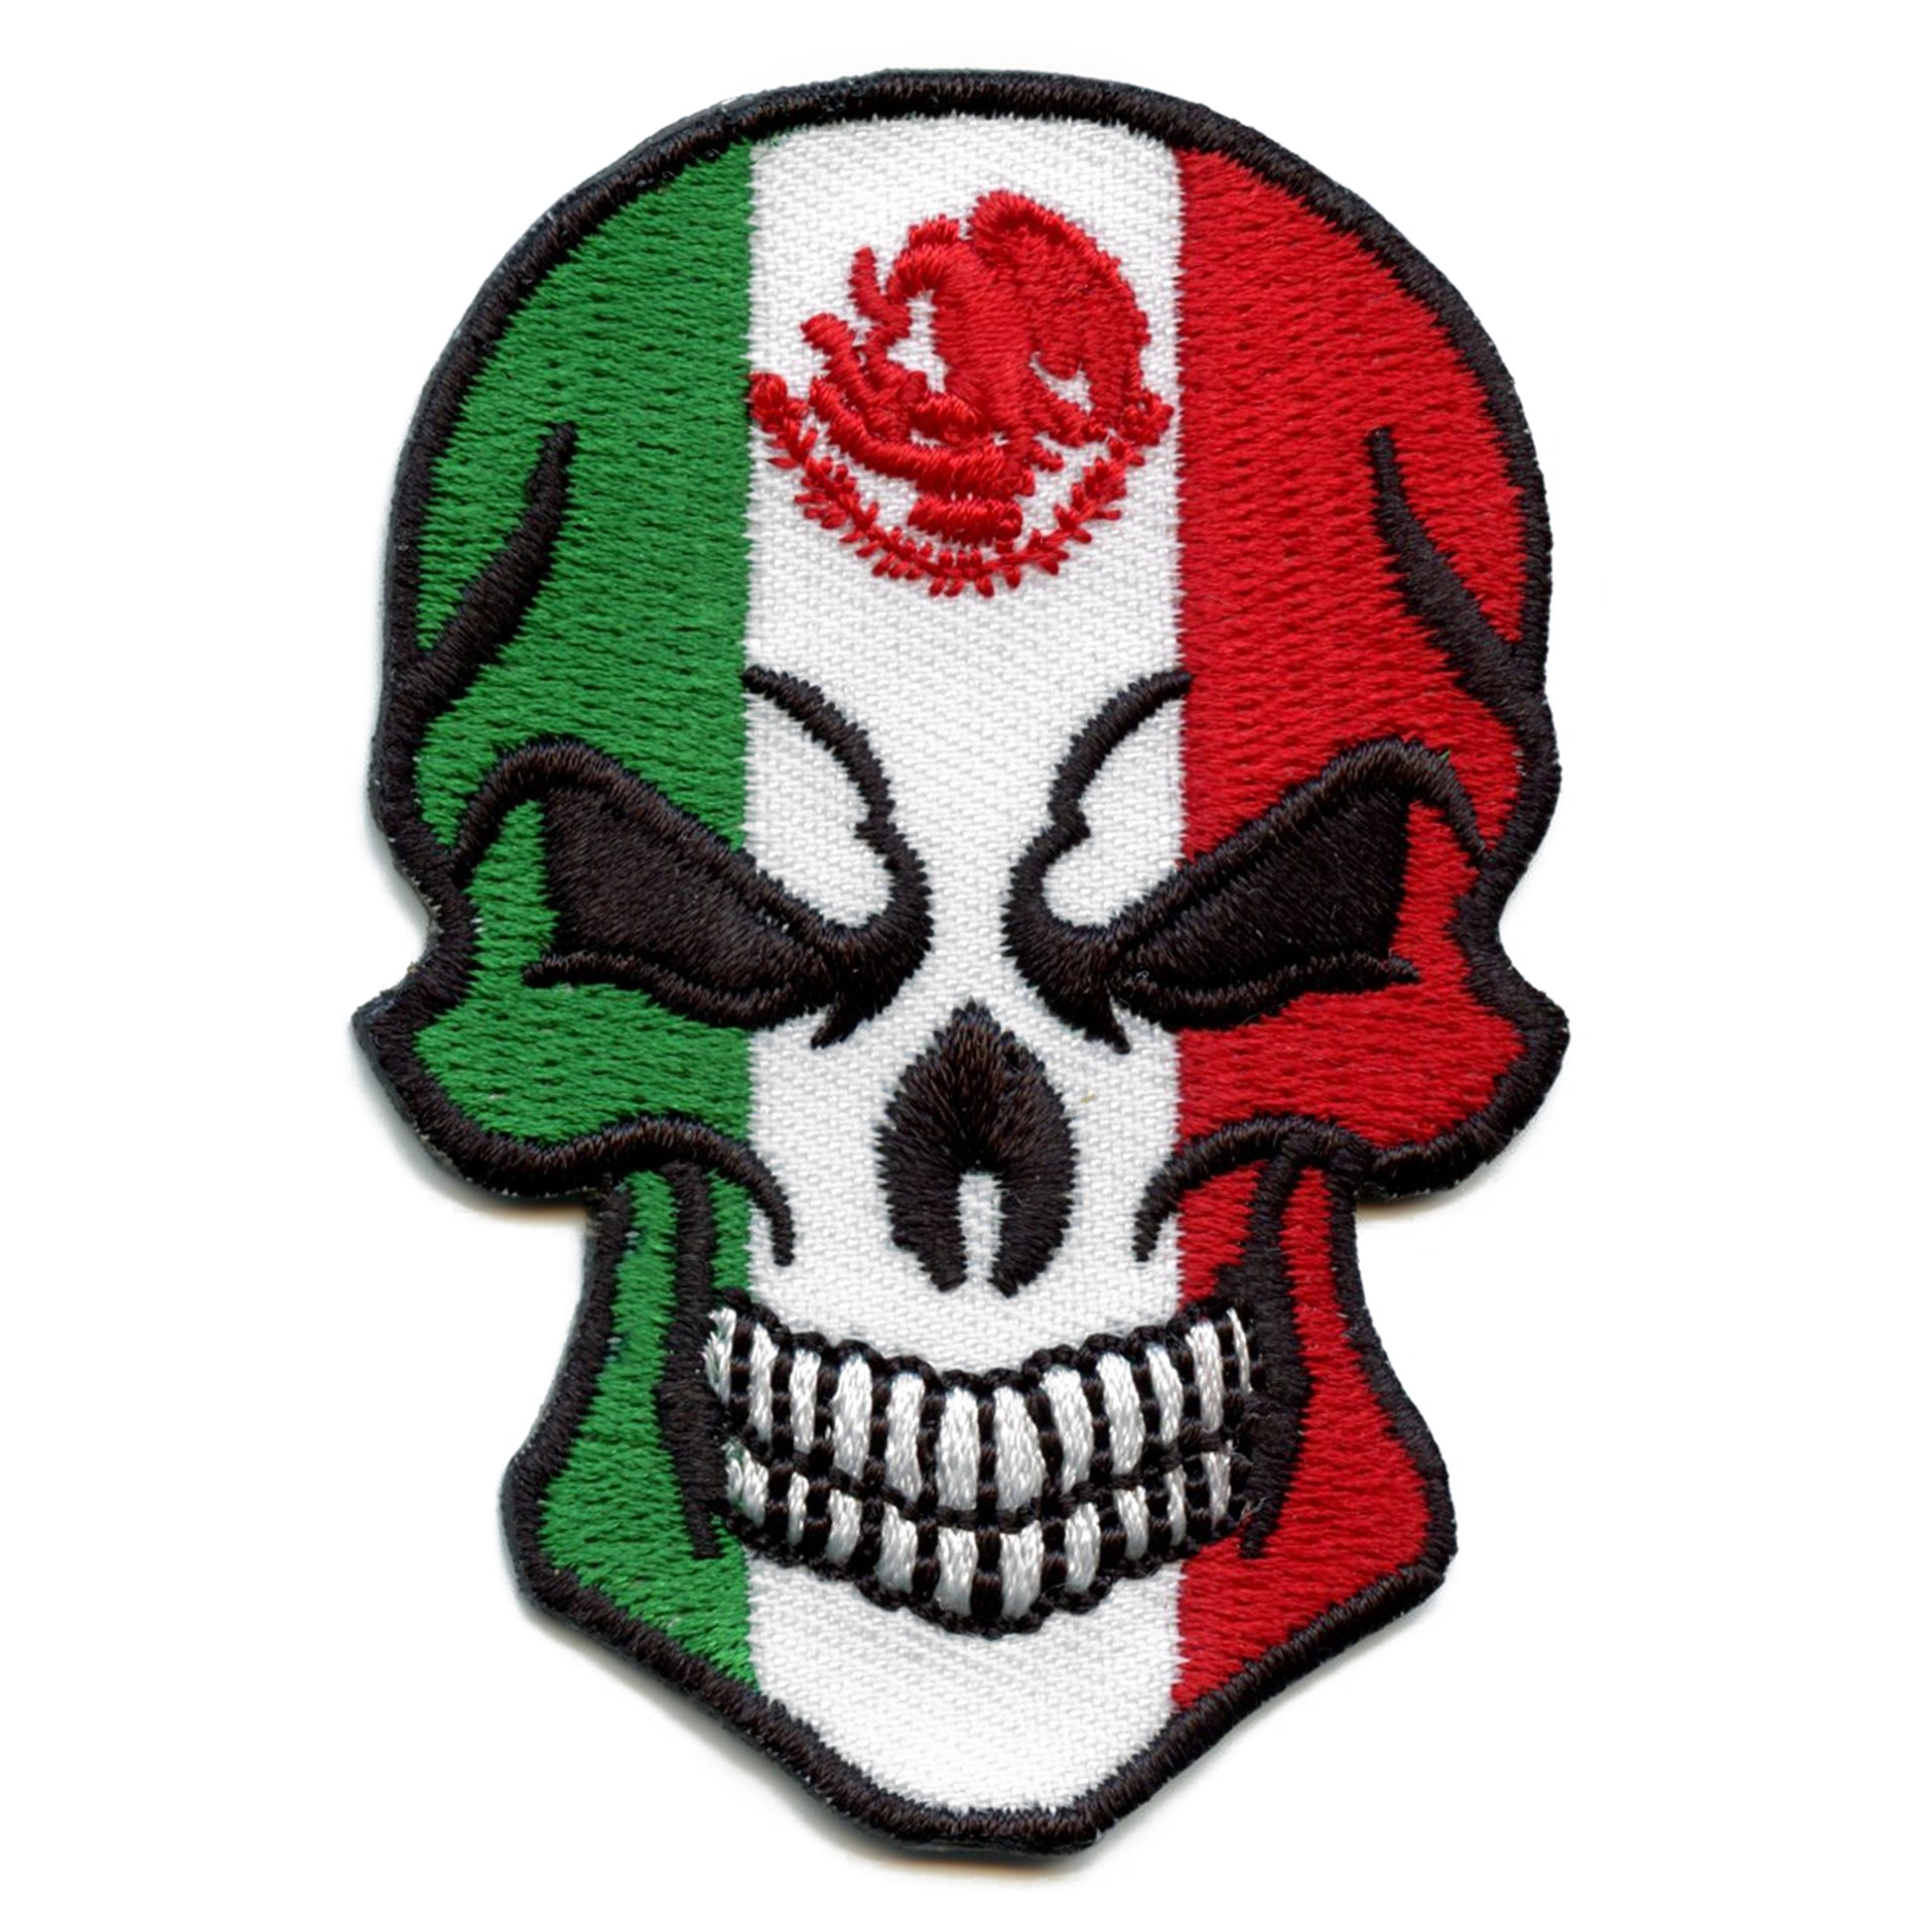 LOS ANGELES - US x Mexico flags souvenir embroidered patch